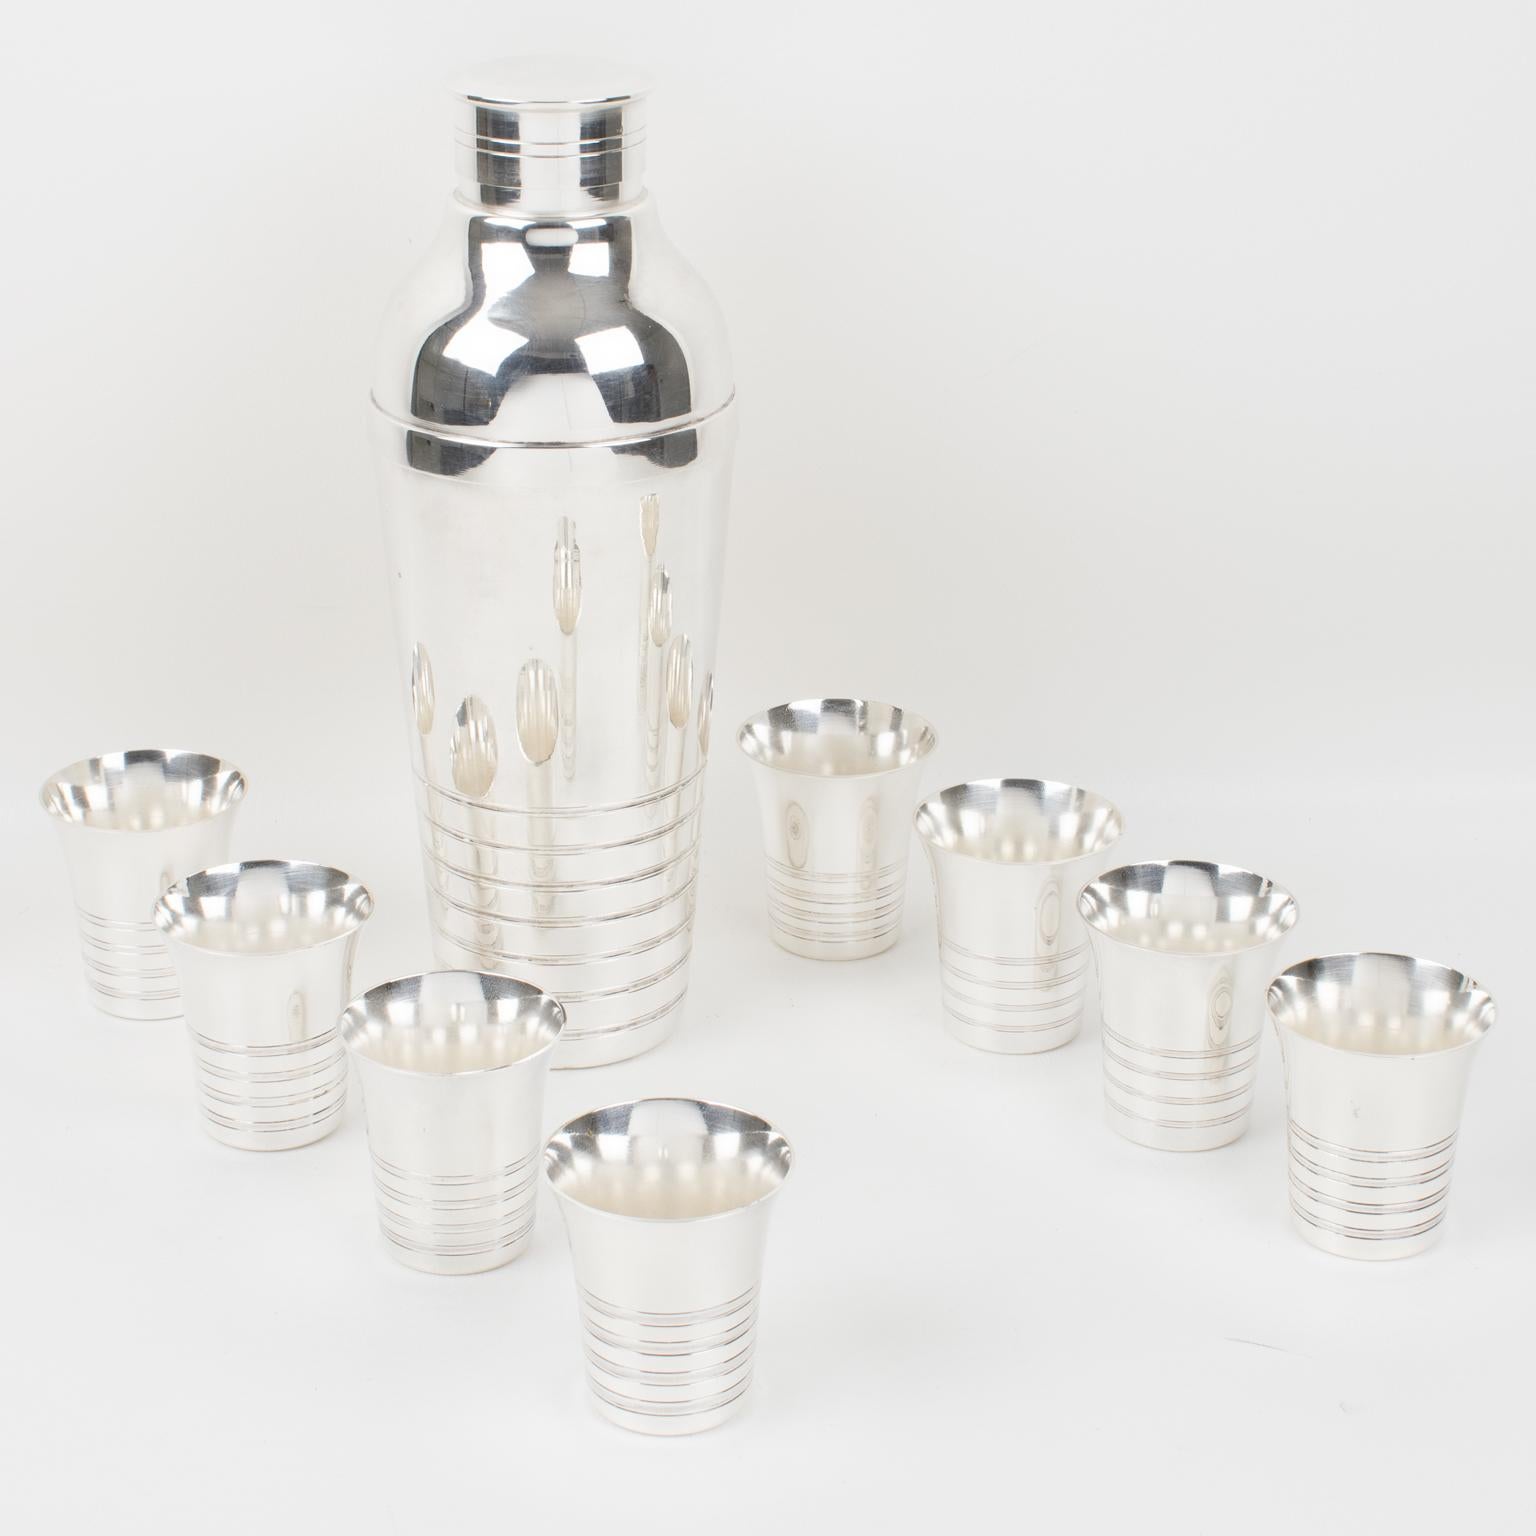 This elegant French Art Deco silver plate barware serving set was designed by Silversmith Maison Montagnon, Lyon. The three-sectioned designed cylindrical cocktail or Martini shaker has a removable cap and strainer. The bar set is completed with